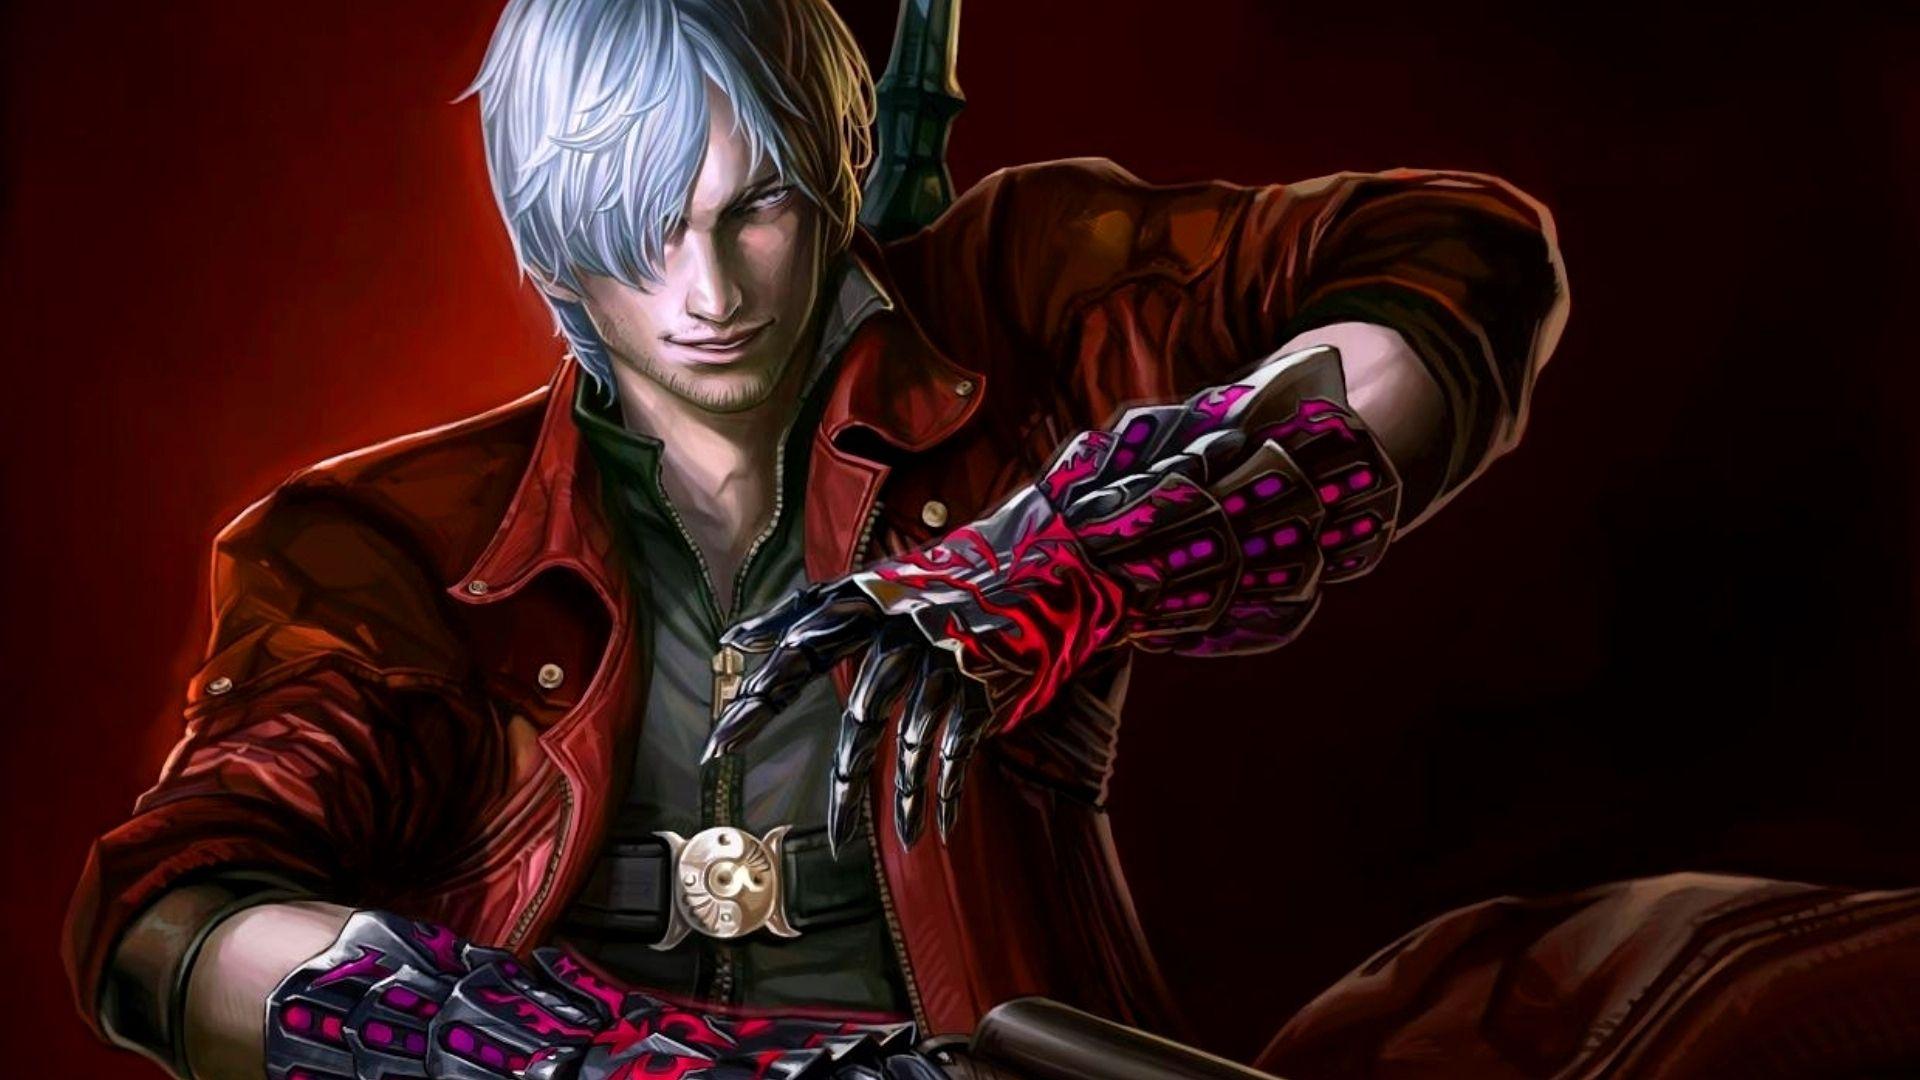 Devil May Cry Wallpaper 14384 1920x1080 px